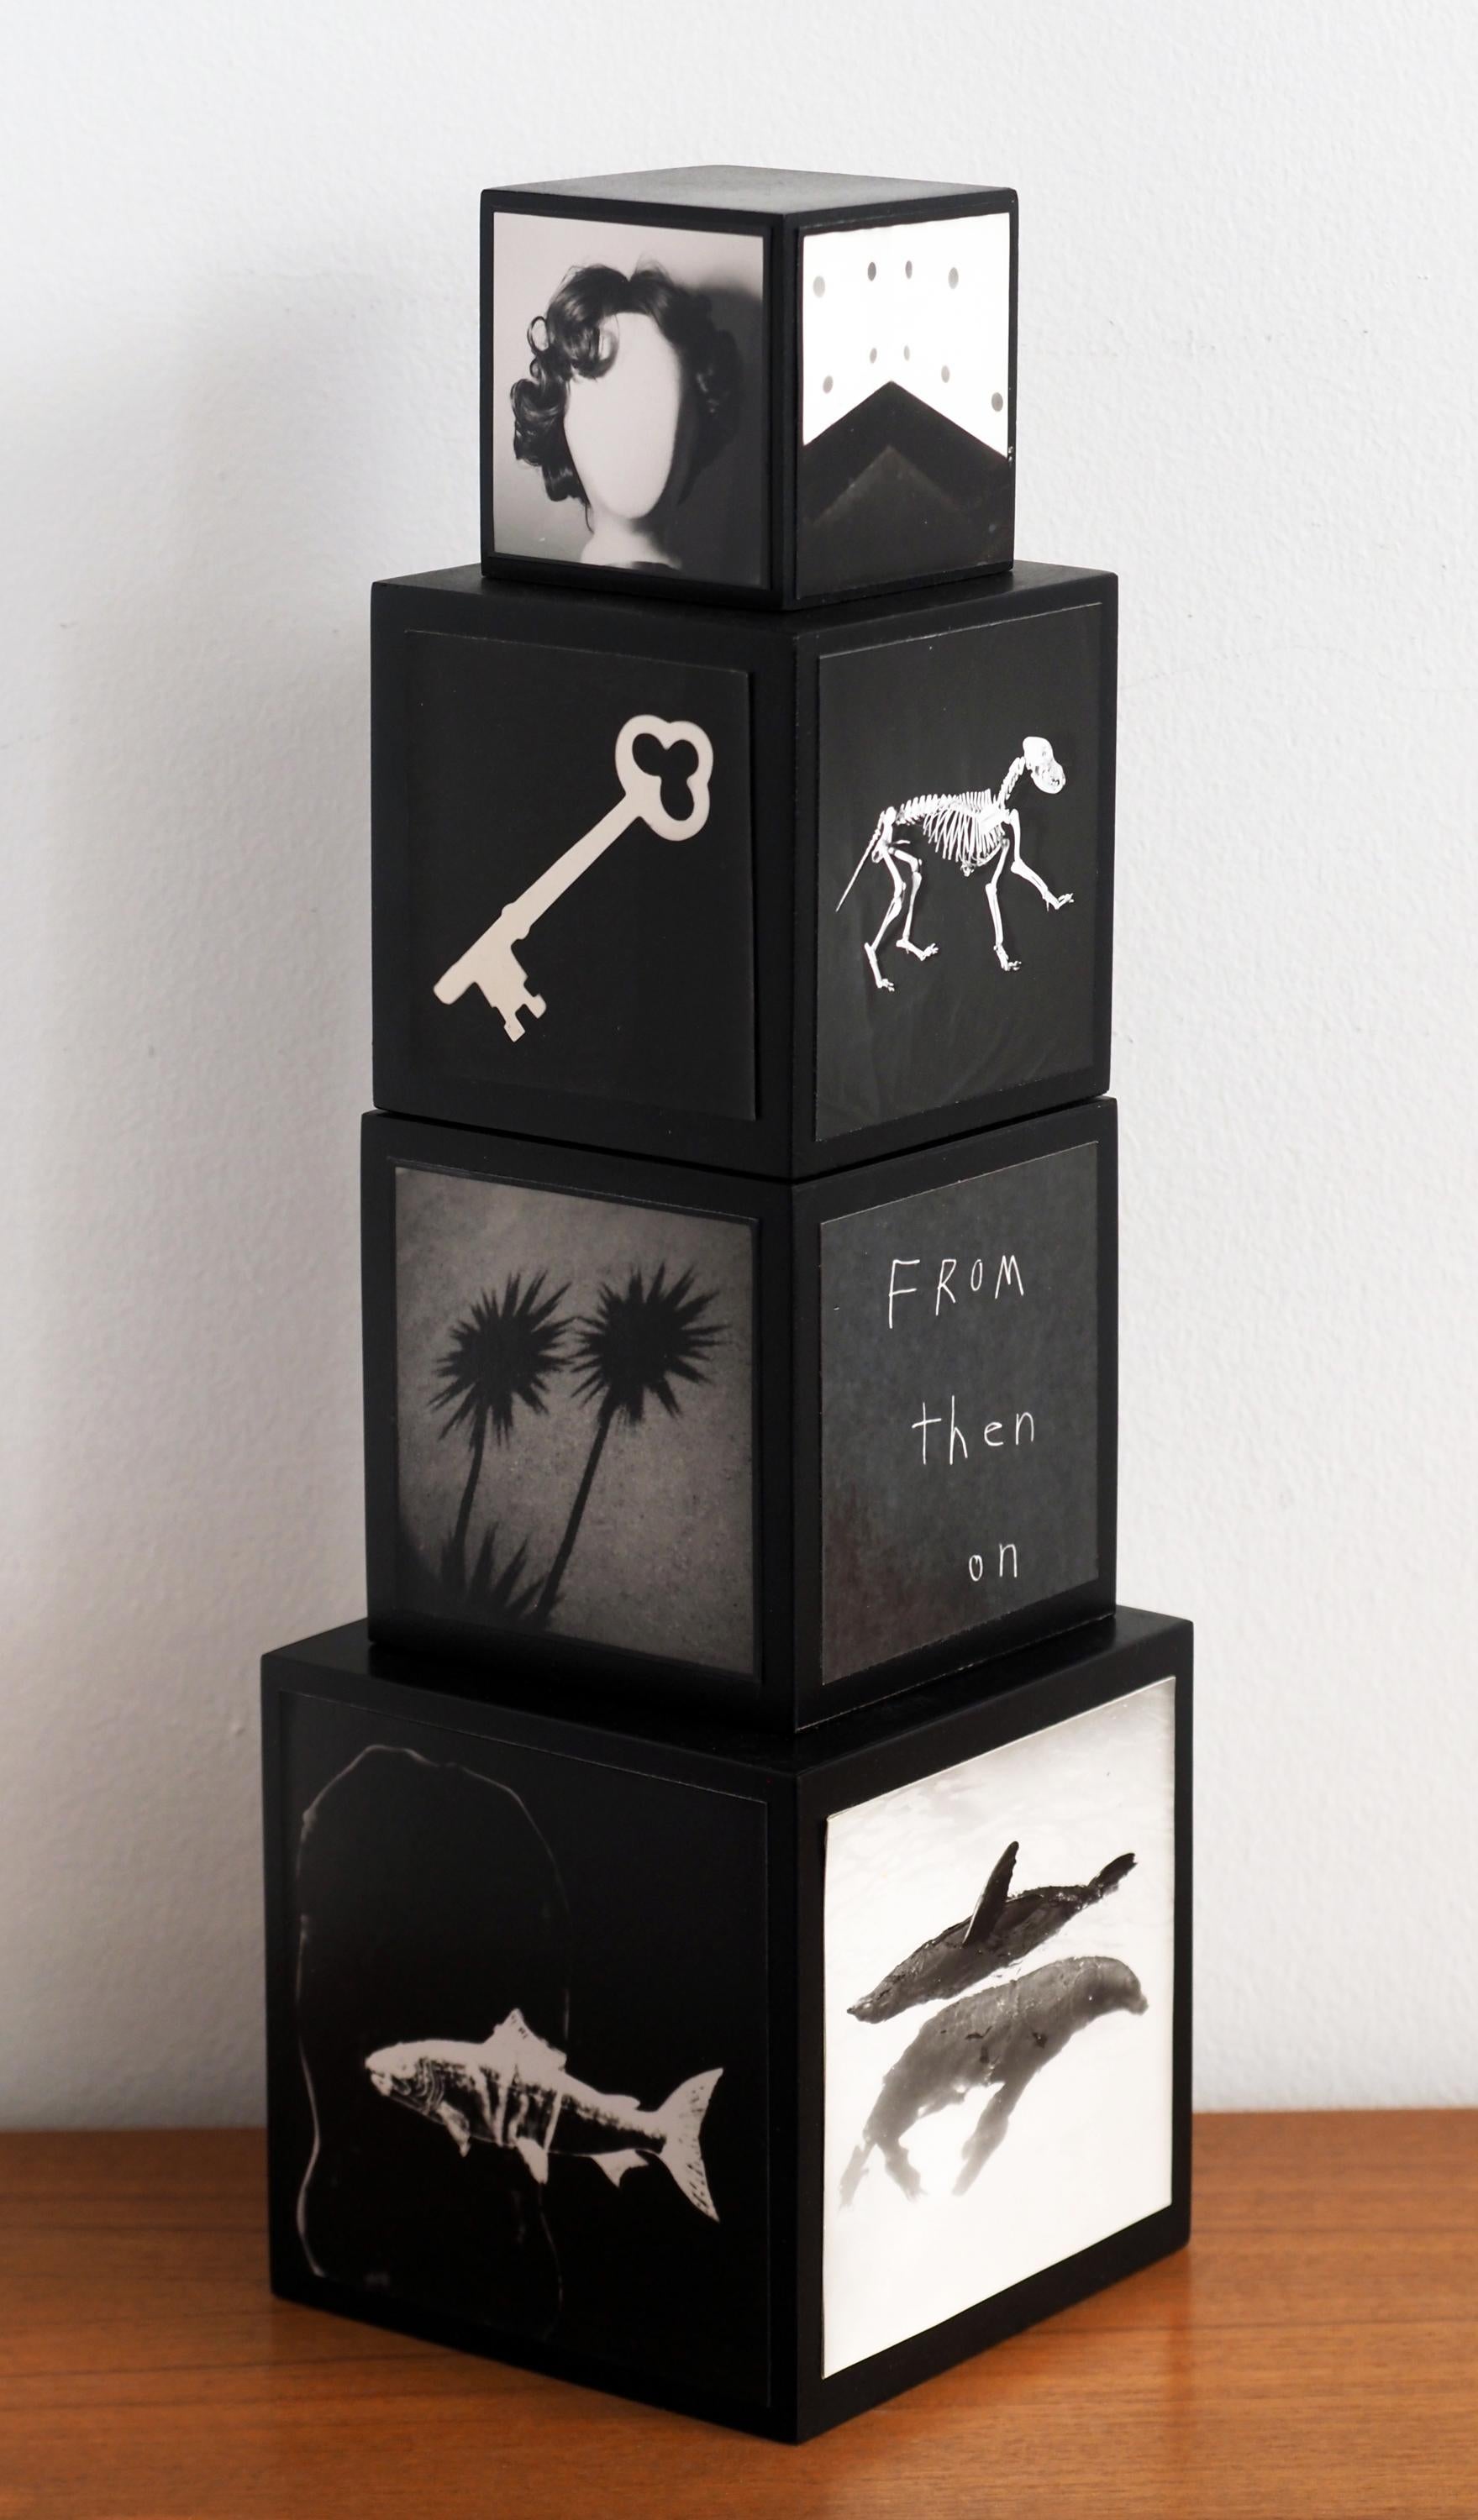 Jenny Lynn Black and White Photograph - Tell-Tale PhotoTotem: stacked wood cube sculpture w/ black & white photographs